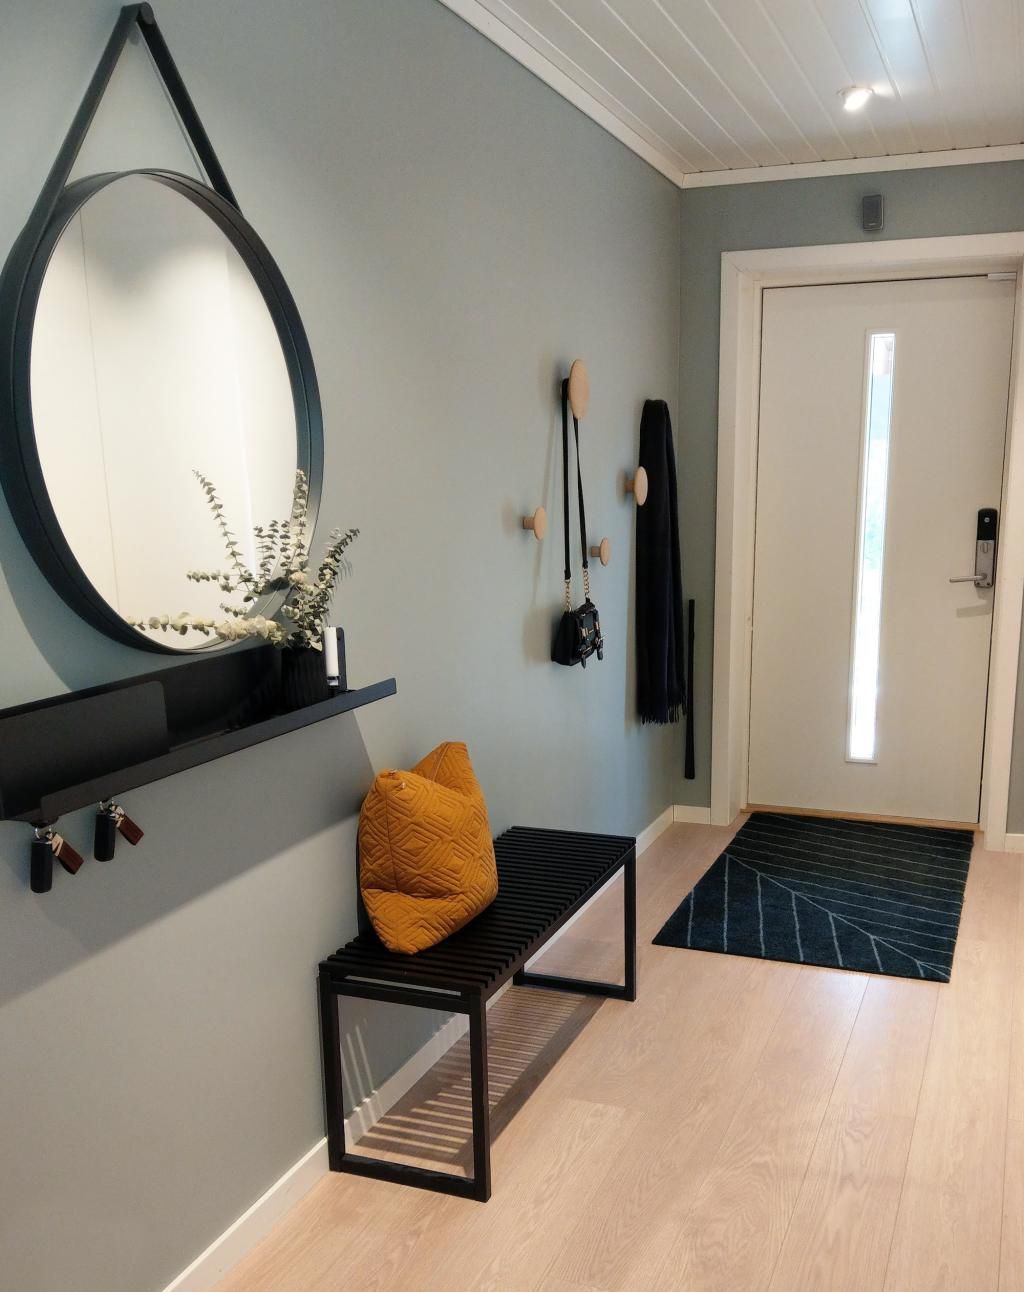 How to decorate your Luxury Entryway - Insplosion Blog